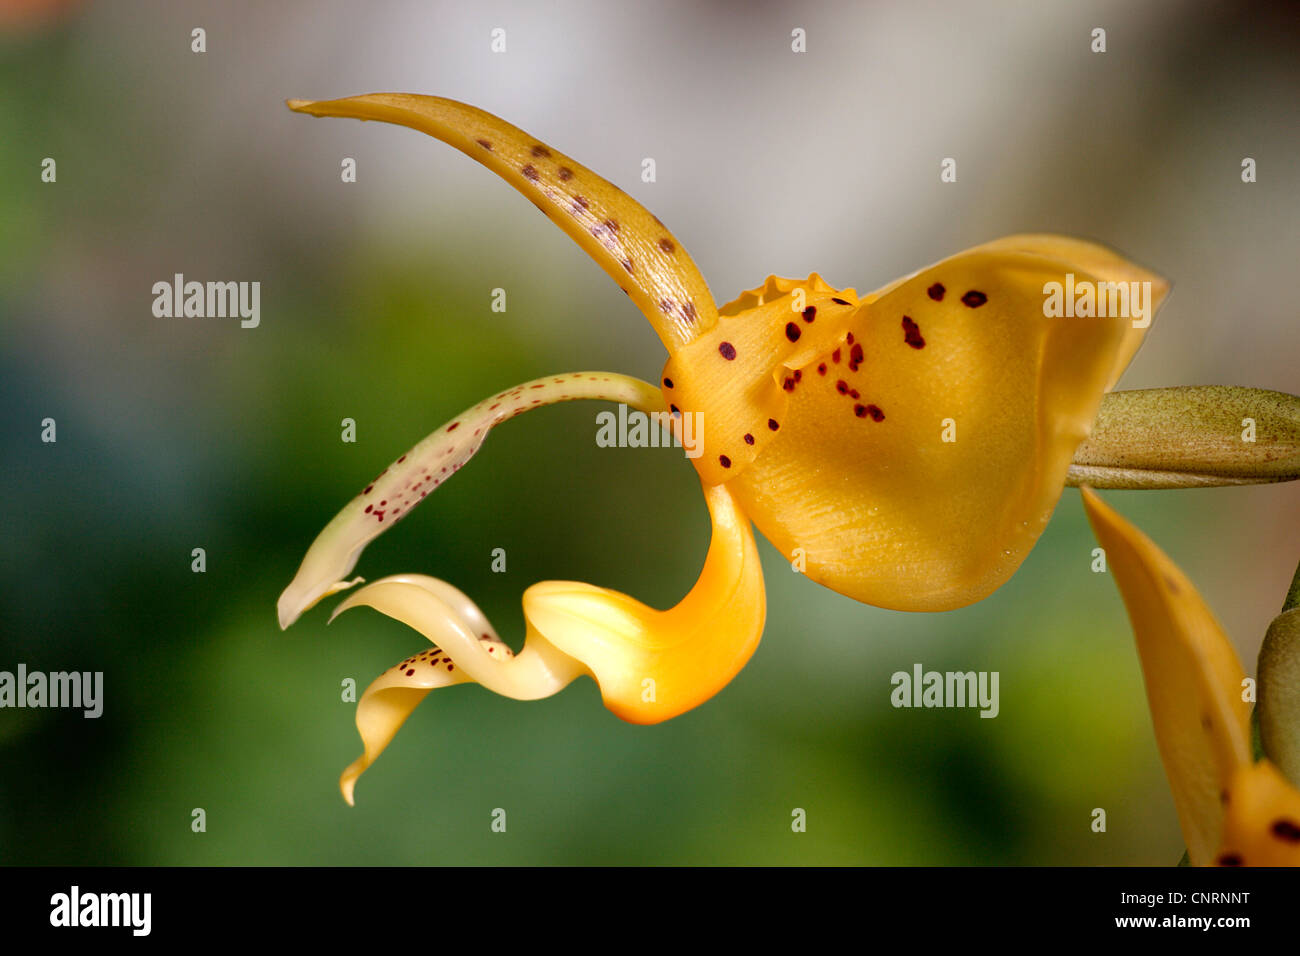 Stanhopea (Stanhopea), flower in lateral view, Germany Stock Photo